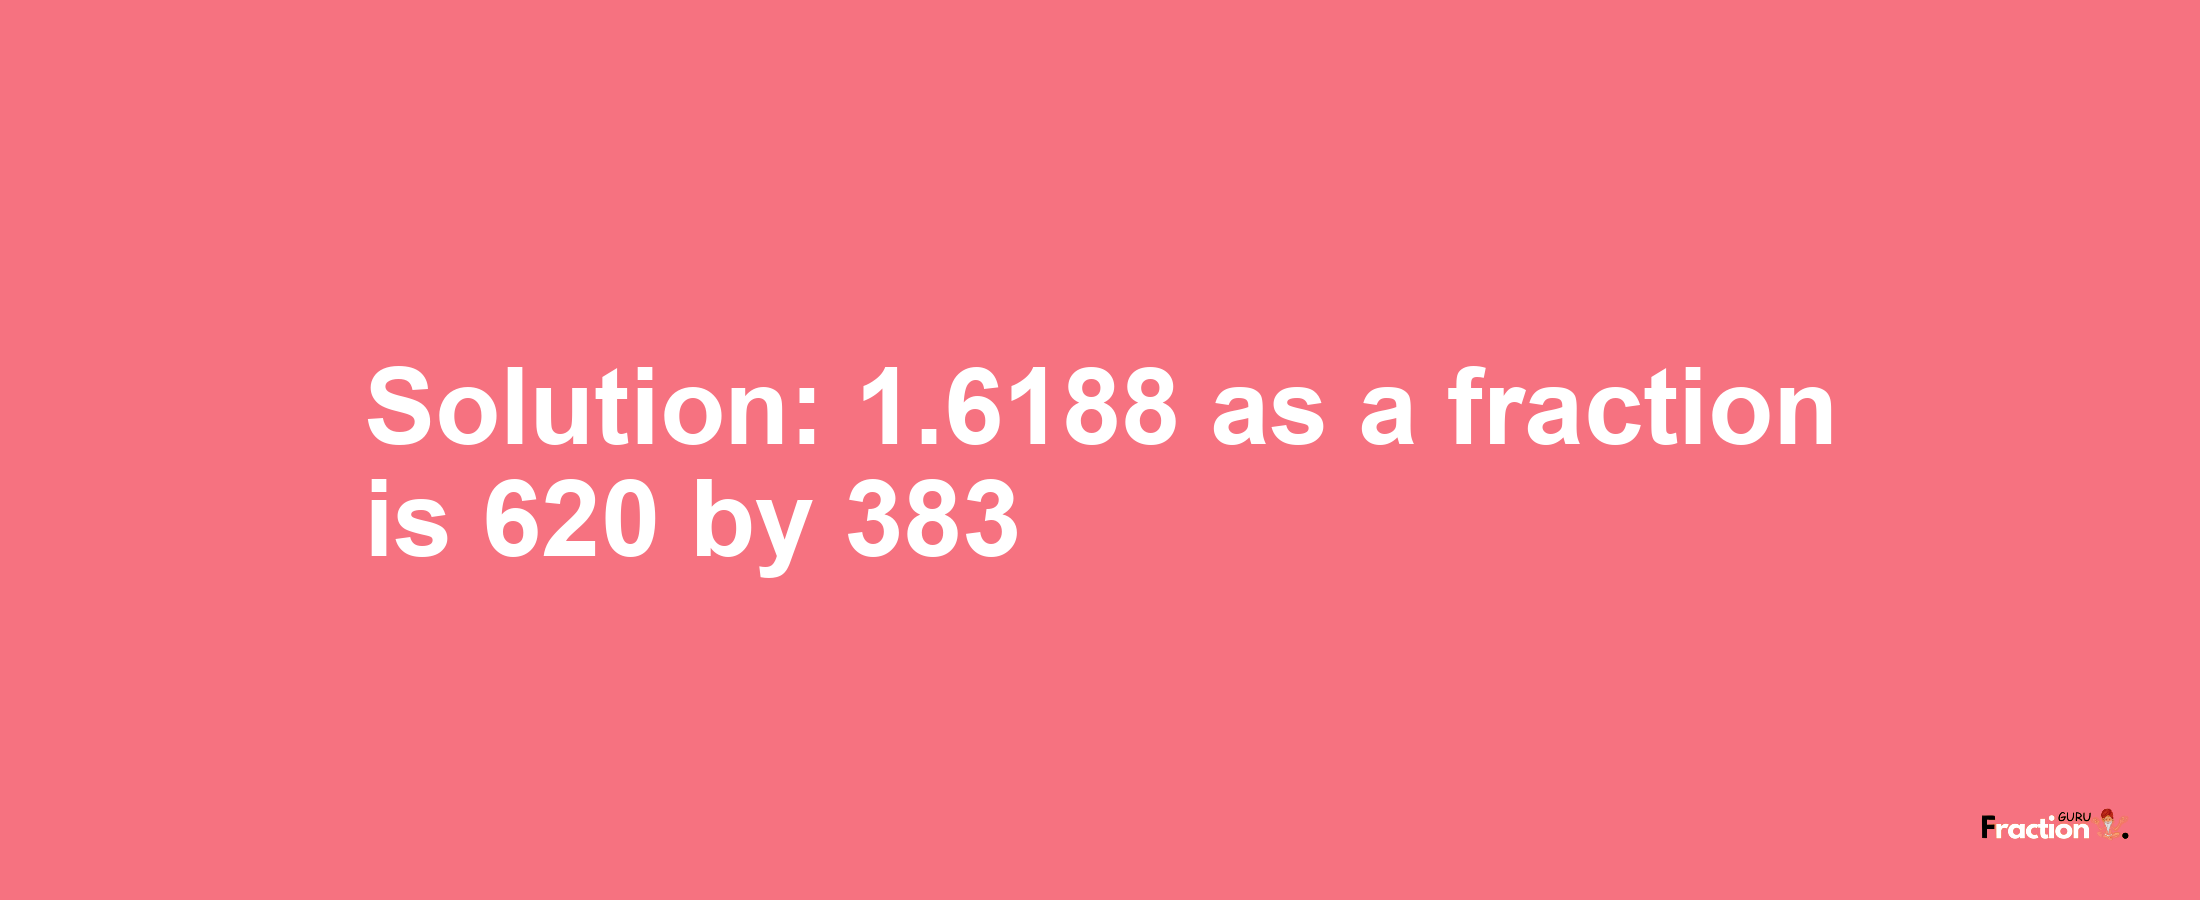 Solution:1.6188 as a fraction is 620/383